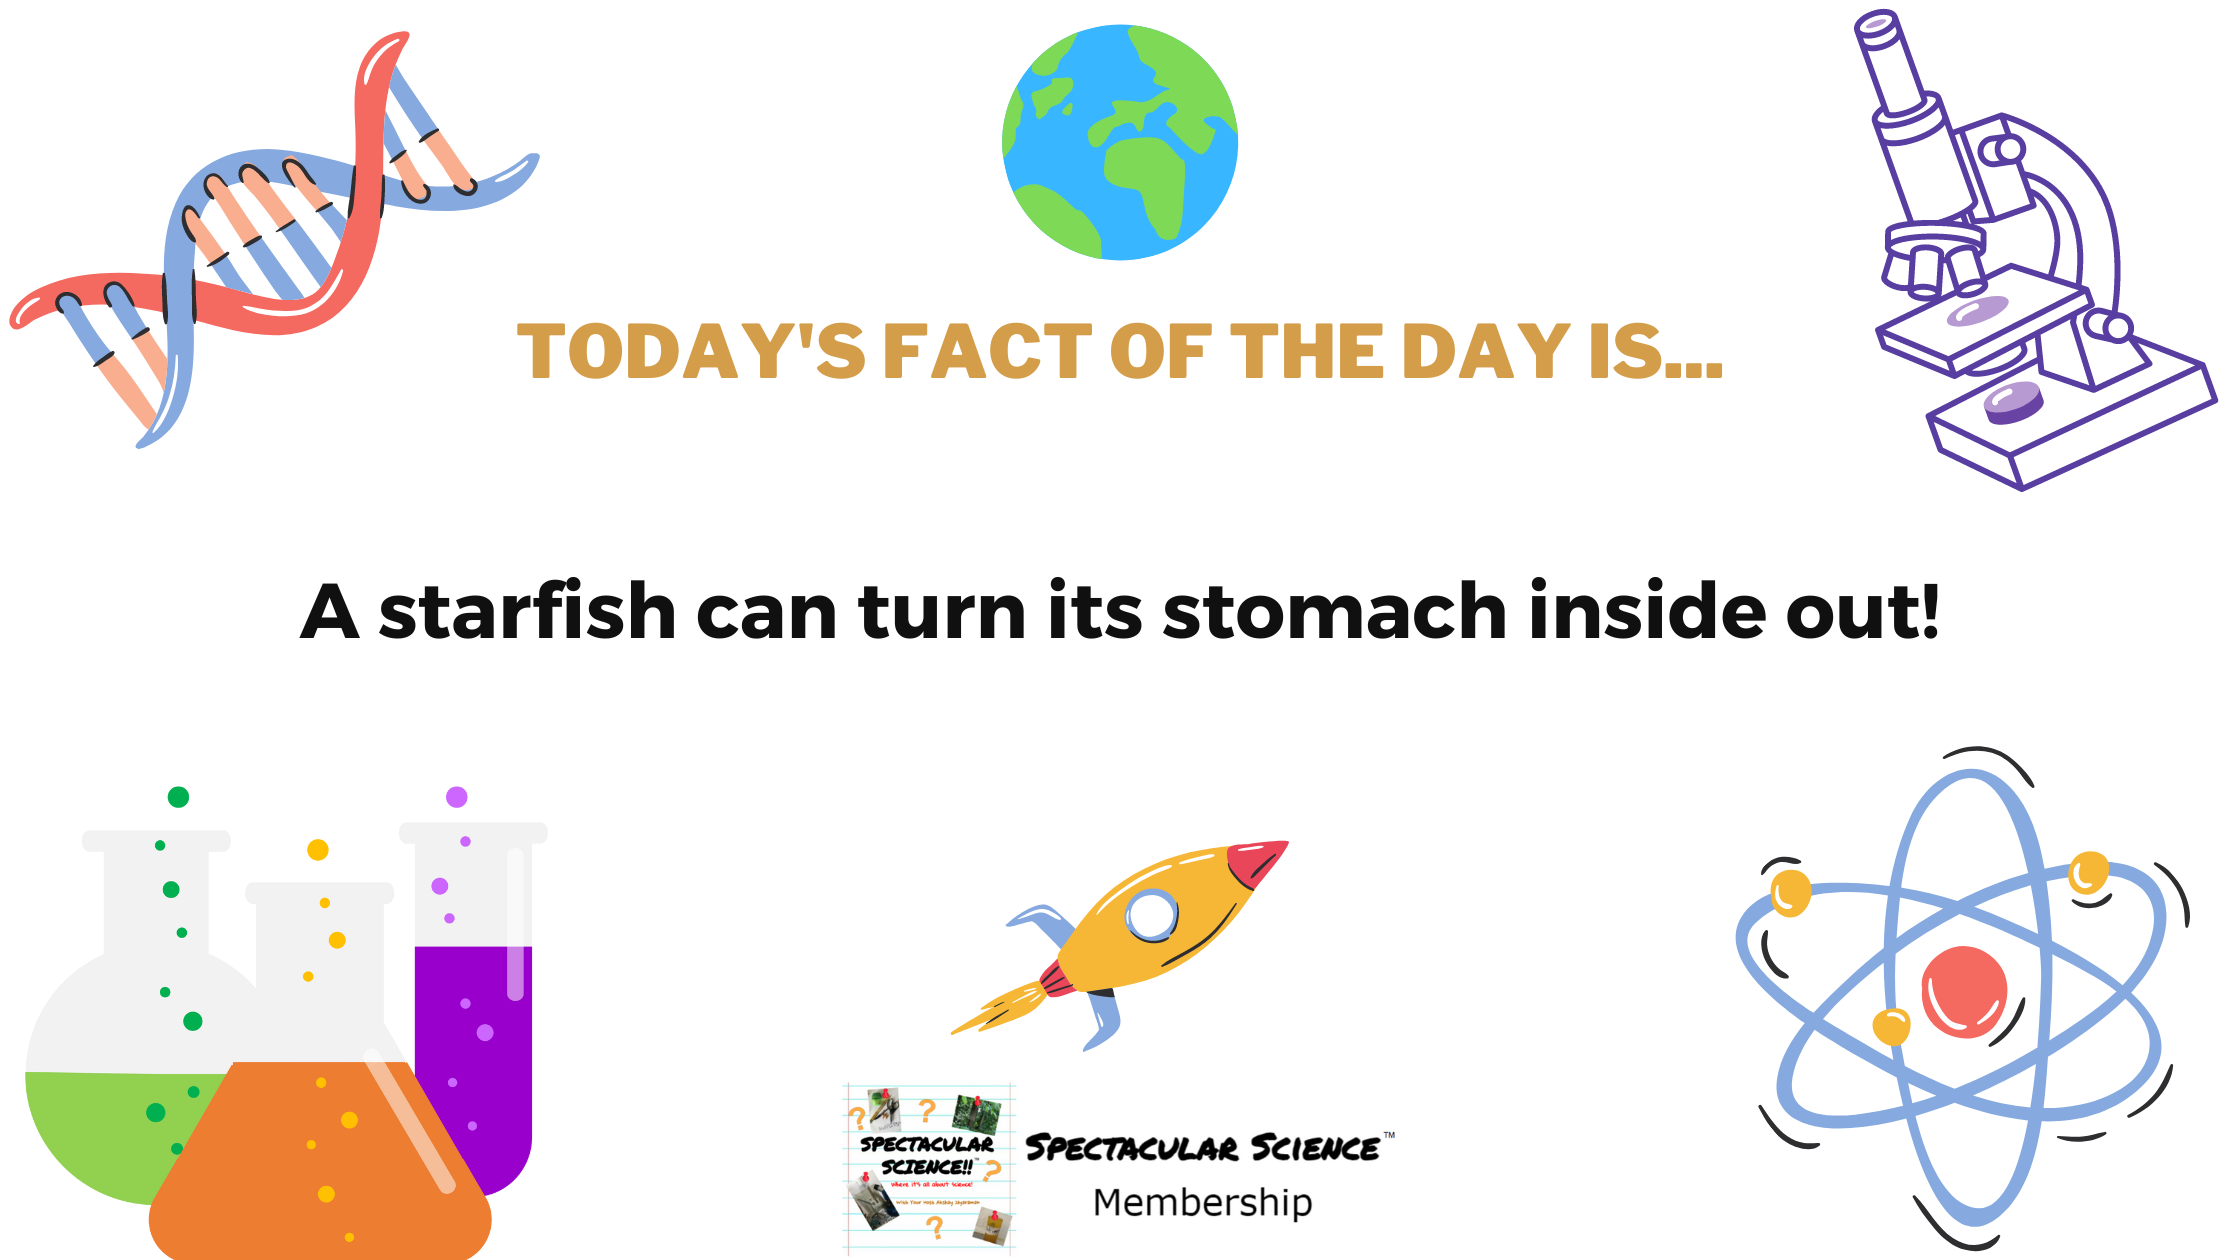 Fact of the Day Image August 12th